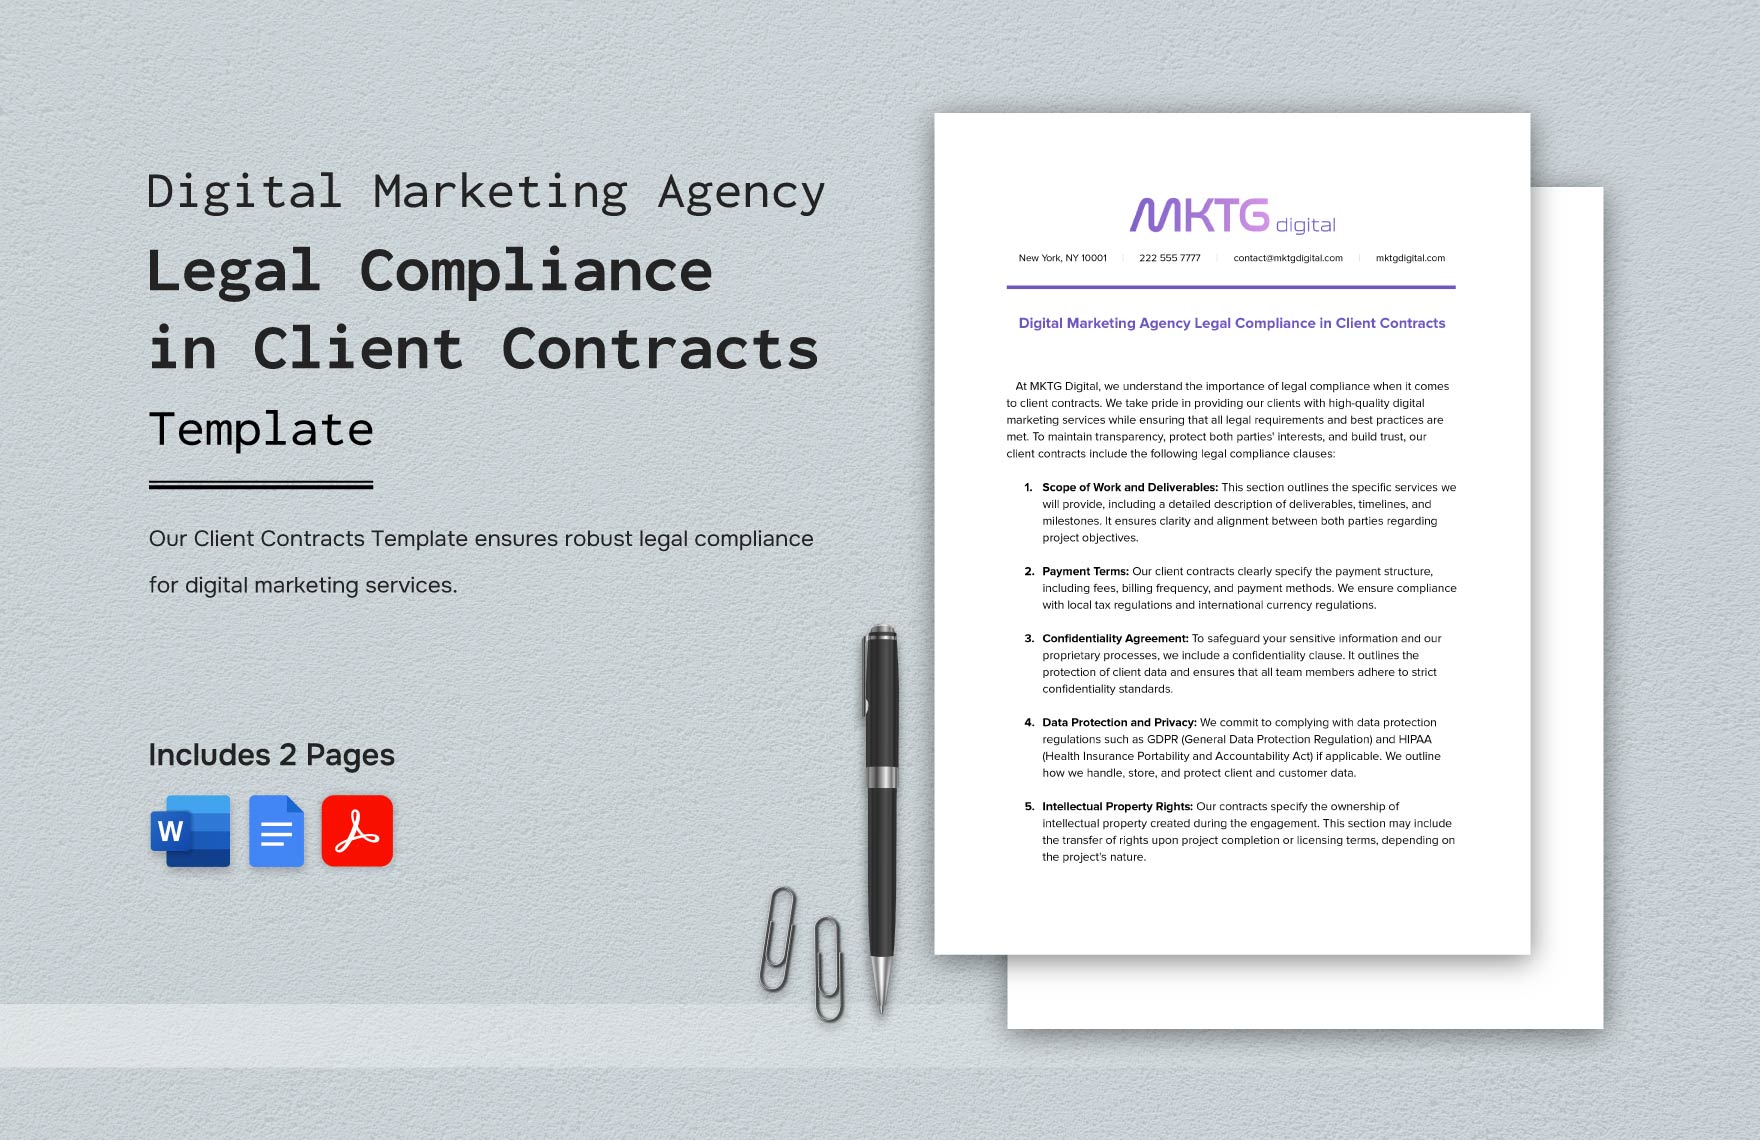 Digital Marketing Agency Legal Compliance in Client Contracts Template